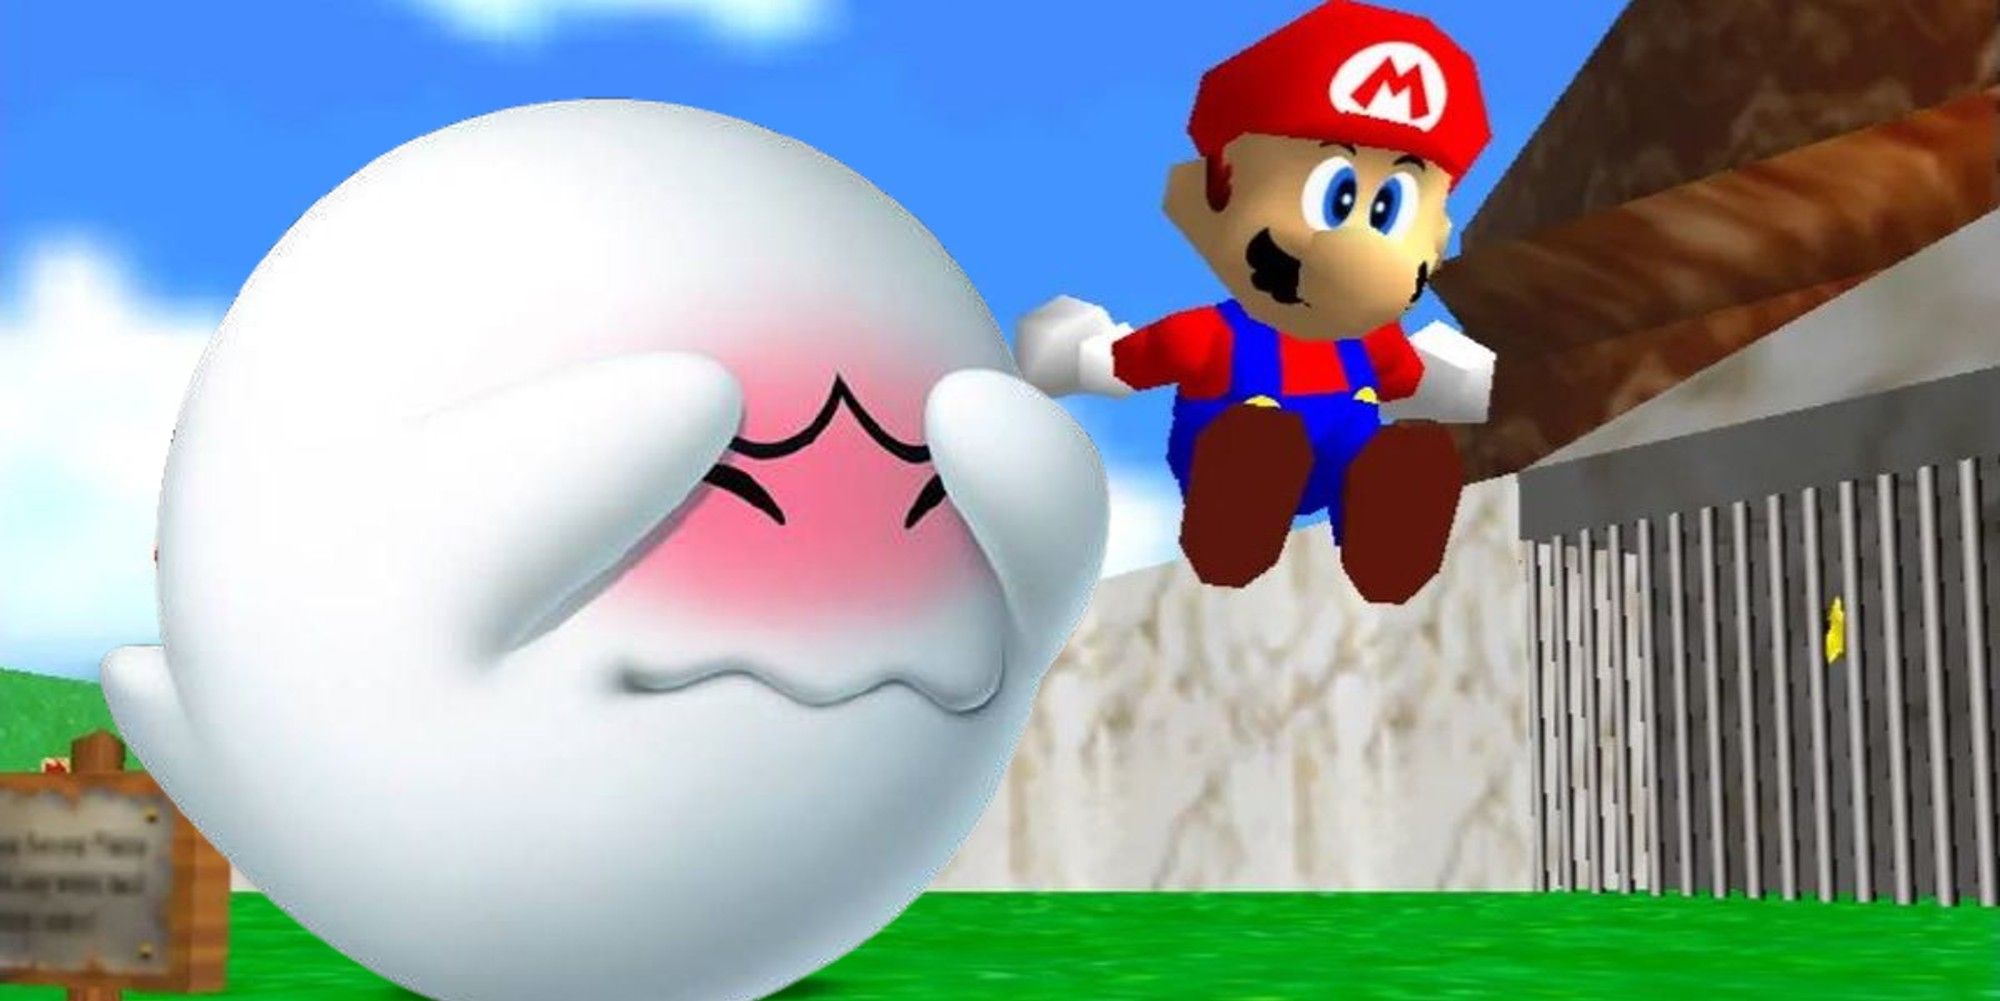 Watch Two Players Play Mario 64 Blindfolded and Beat the Game